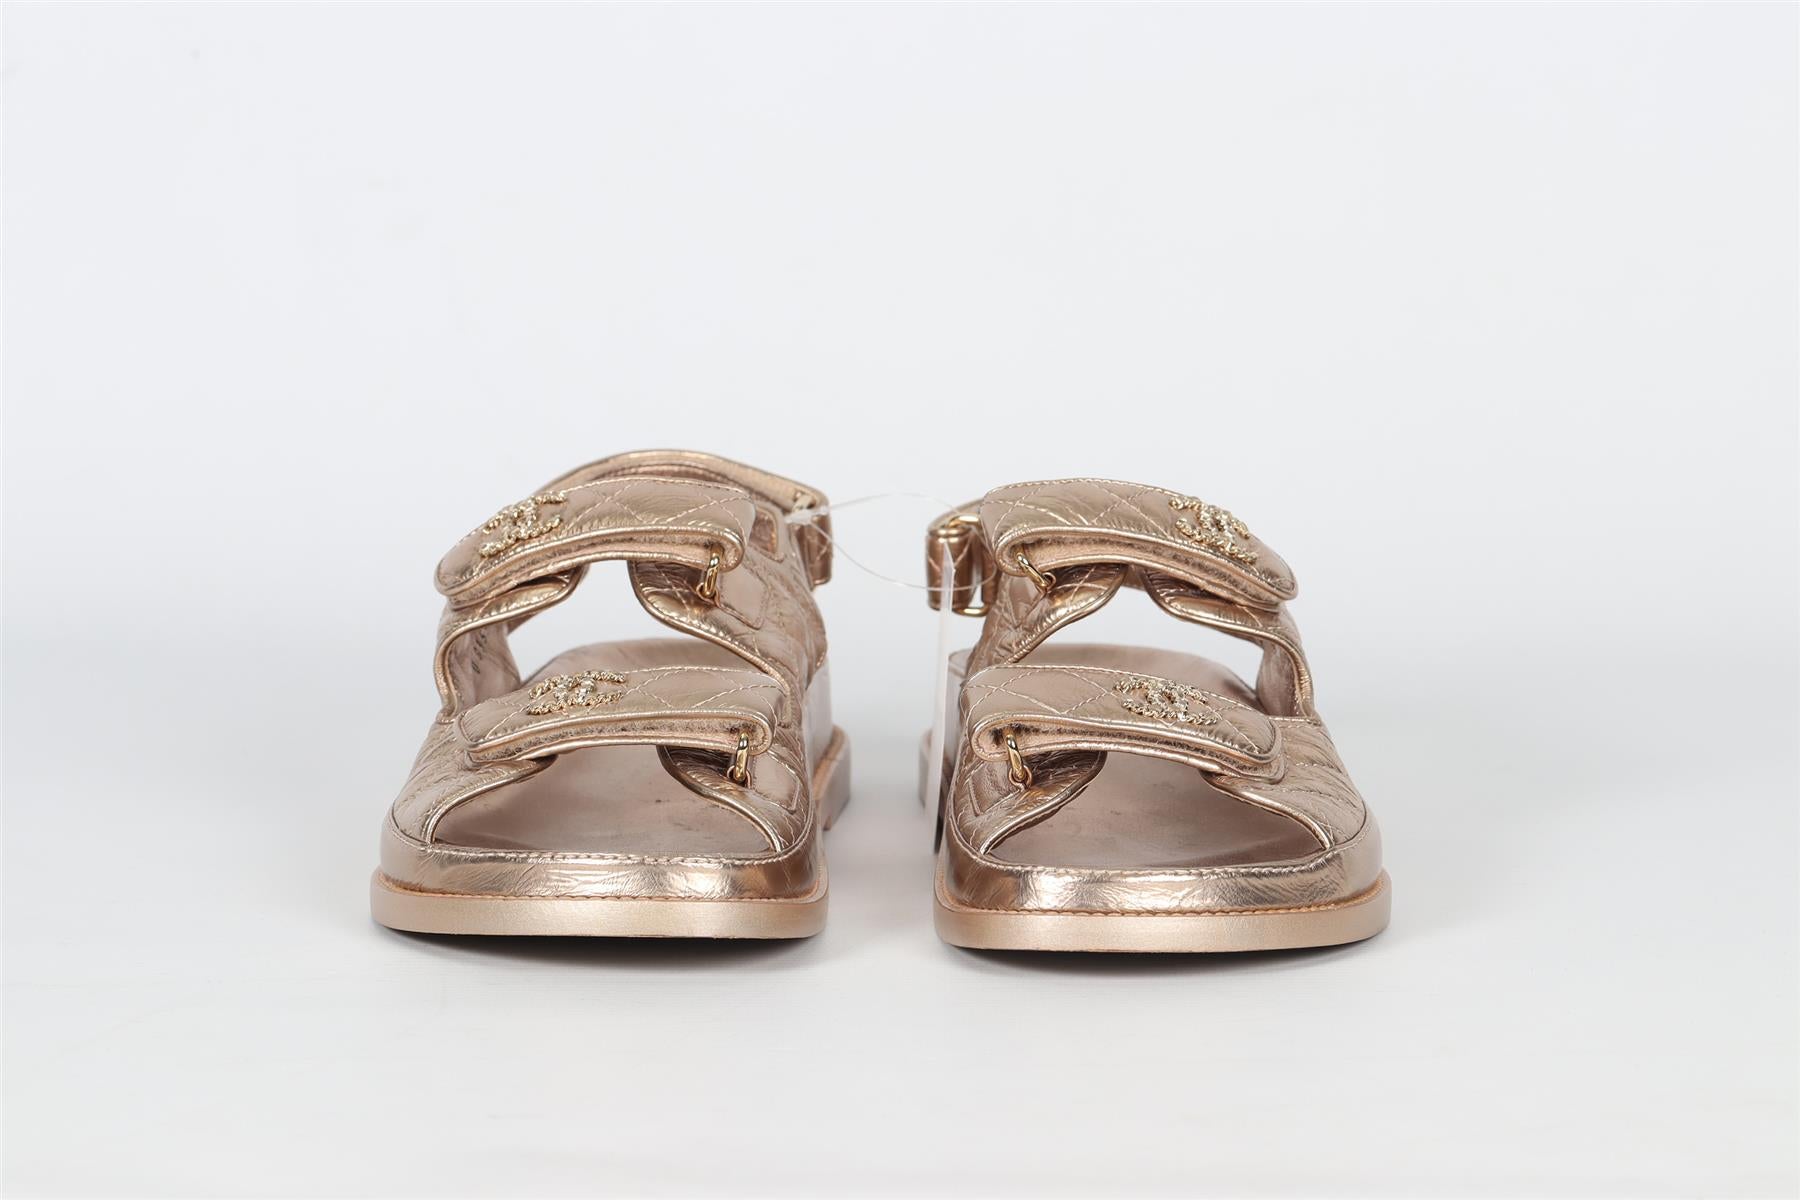 CHANEL 2021 DAD QUILTED LEATHER SANDALS EU 38.5 UK 5.5 US 8.5